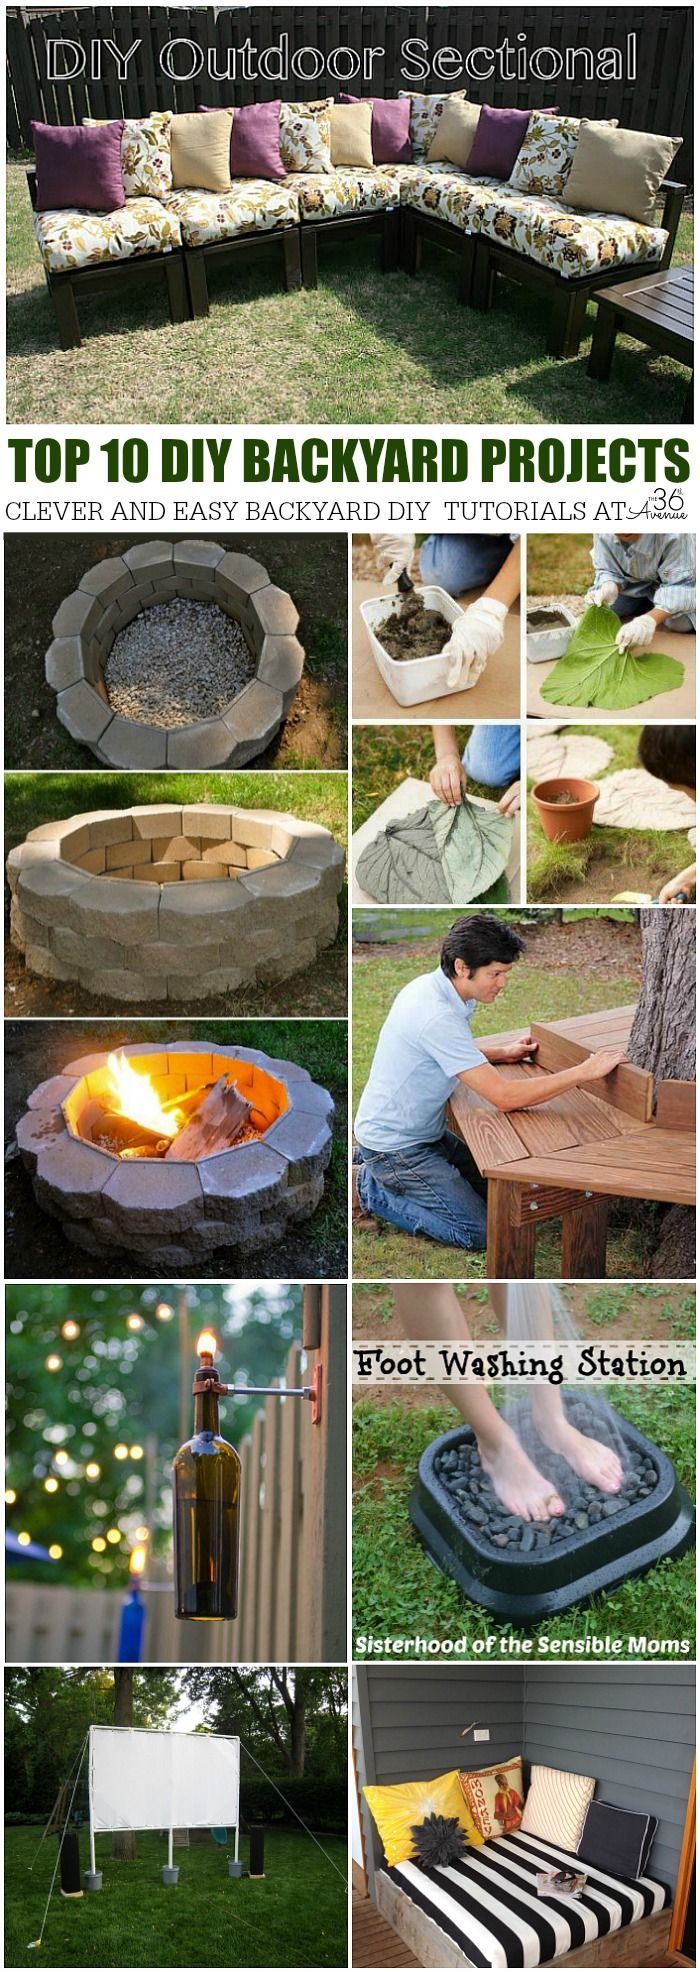 DIY Backyard Top 10 Projects for this summer! Can’t wait to start spending more time outdoors.